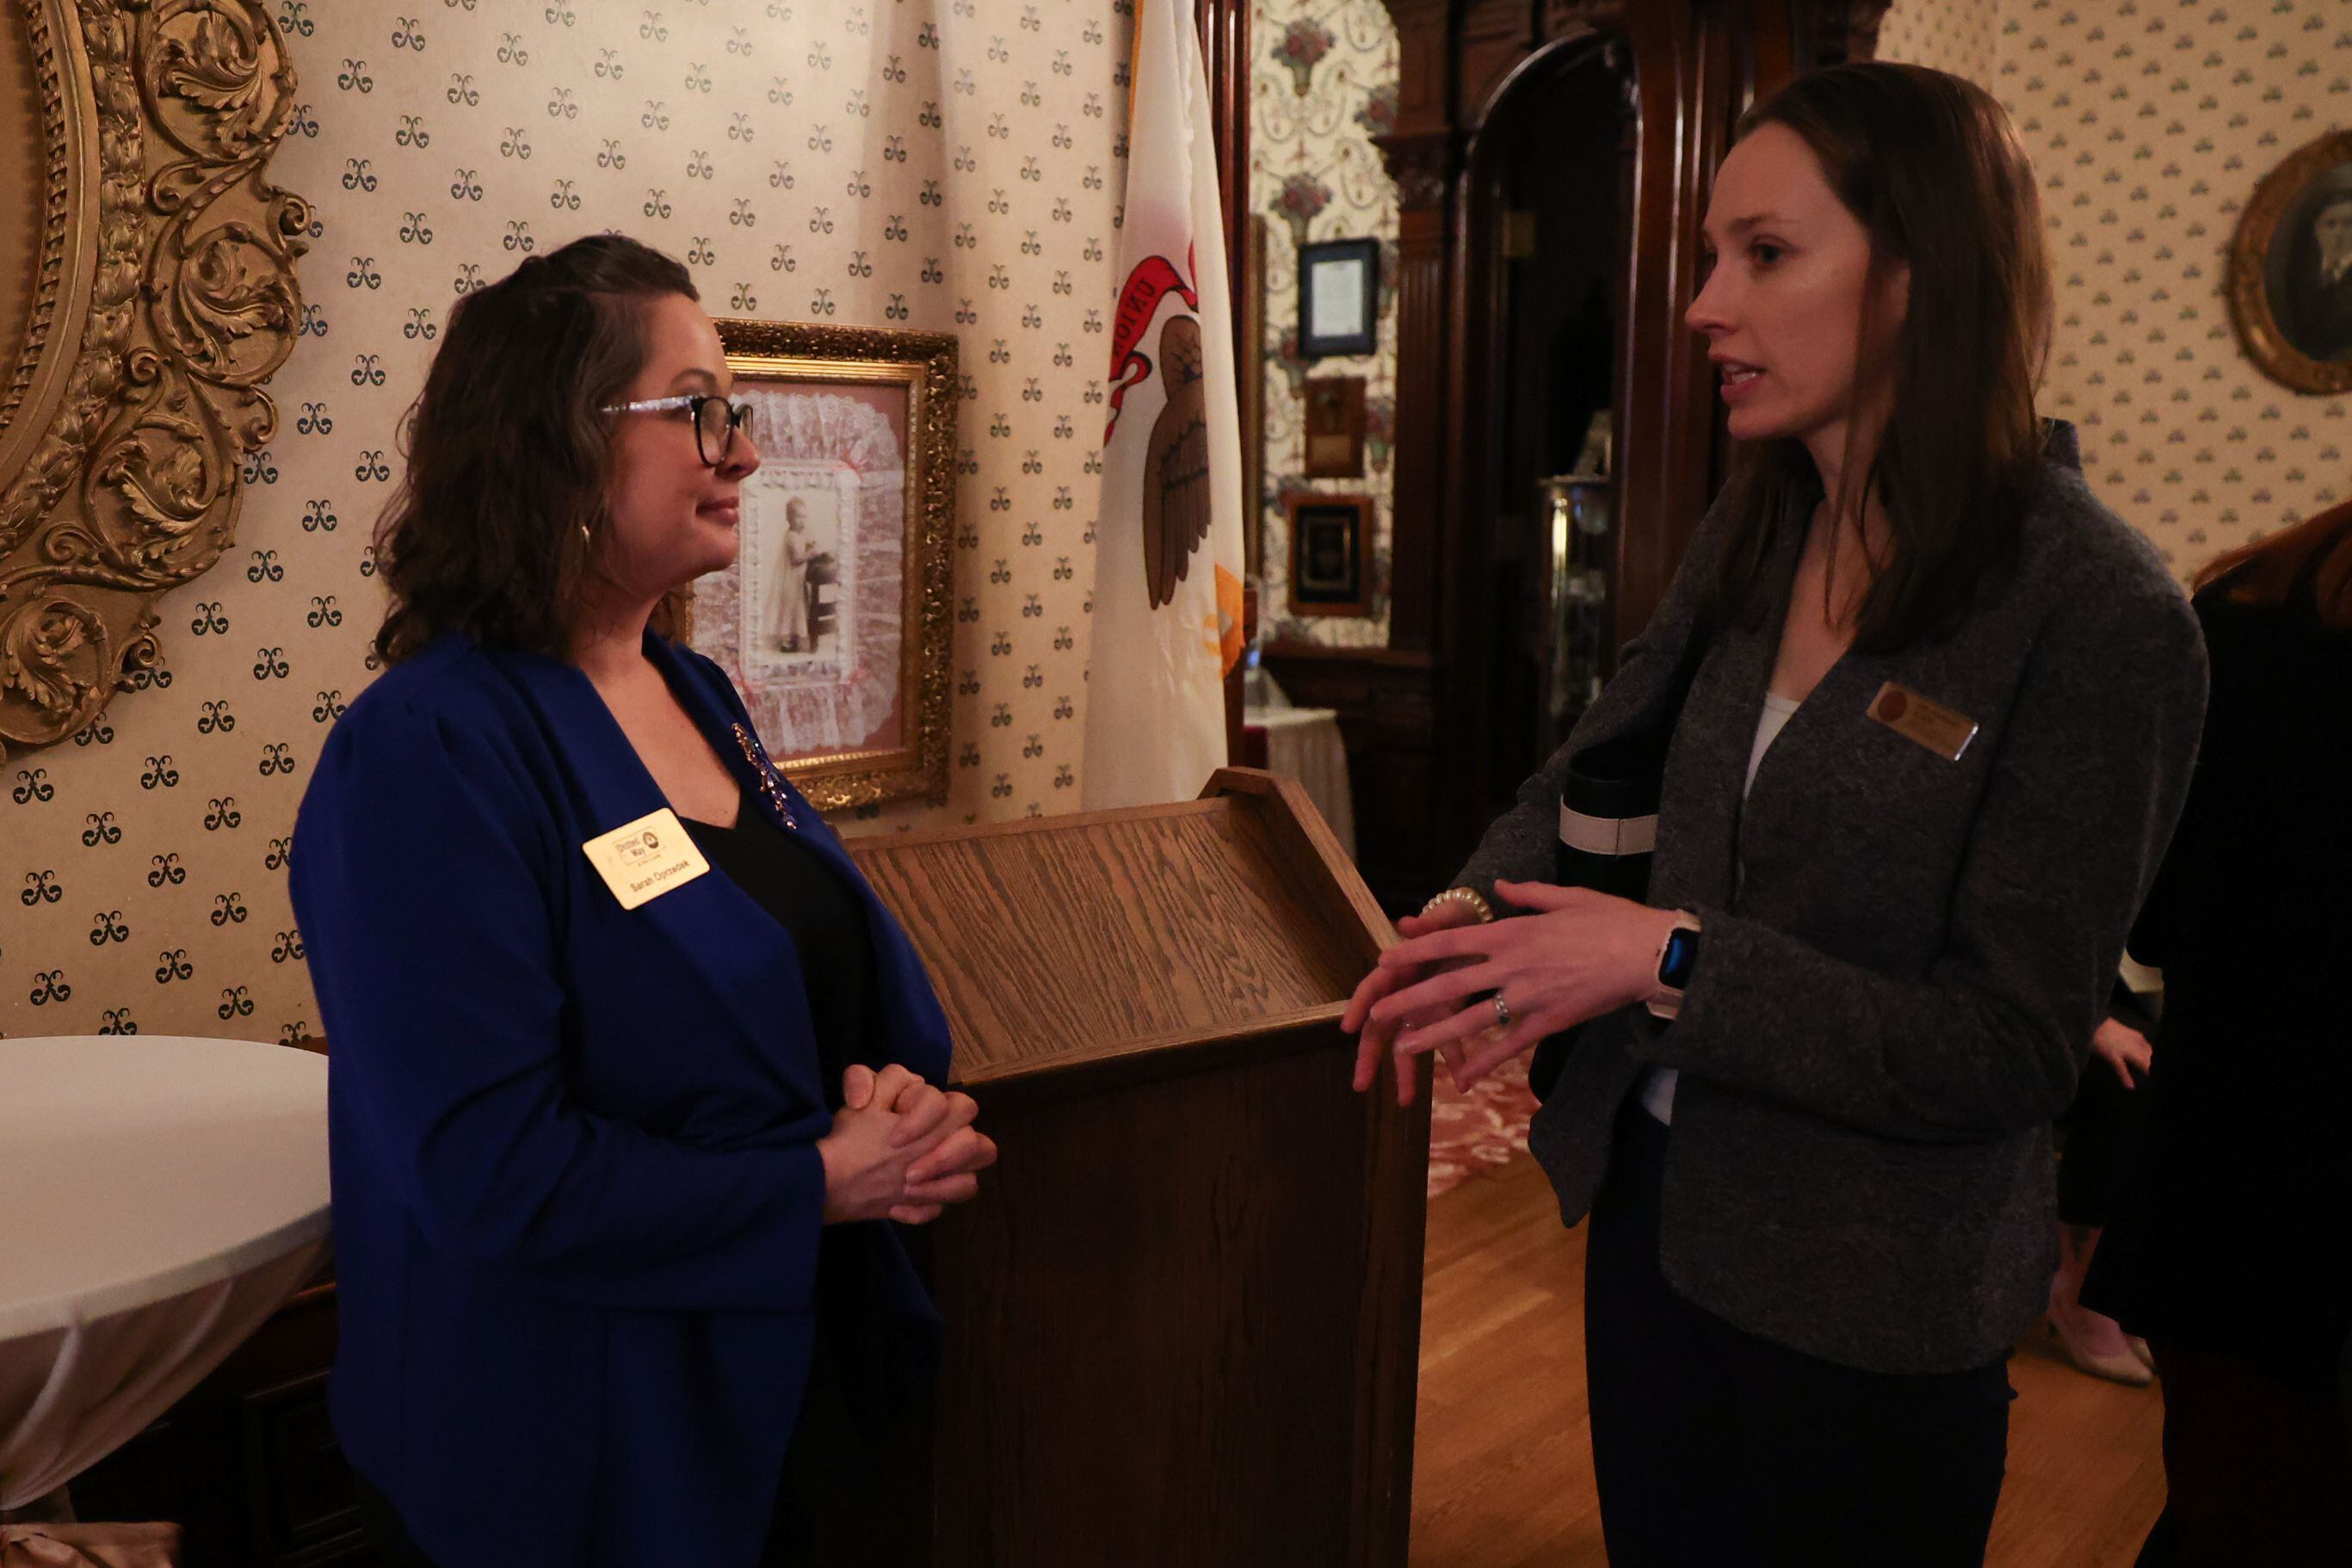 Sarah Oprzedek, United Way of Will County CEO, talks with Lewis University professor Dr. Hannah Klein a United Way private event at the Jacob Henry Mansion on Thursday, February 23rd, 2023 in Joliet.